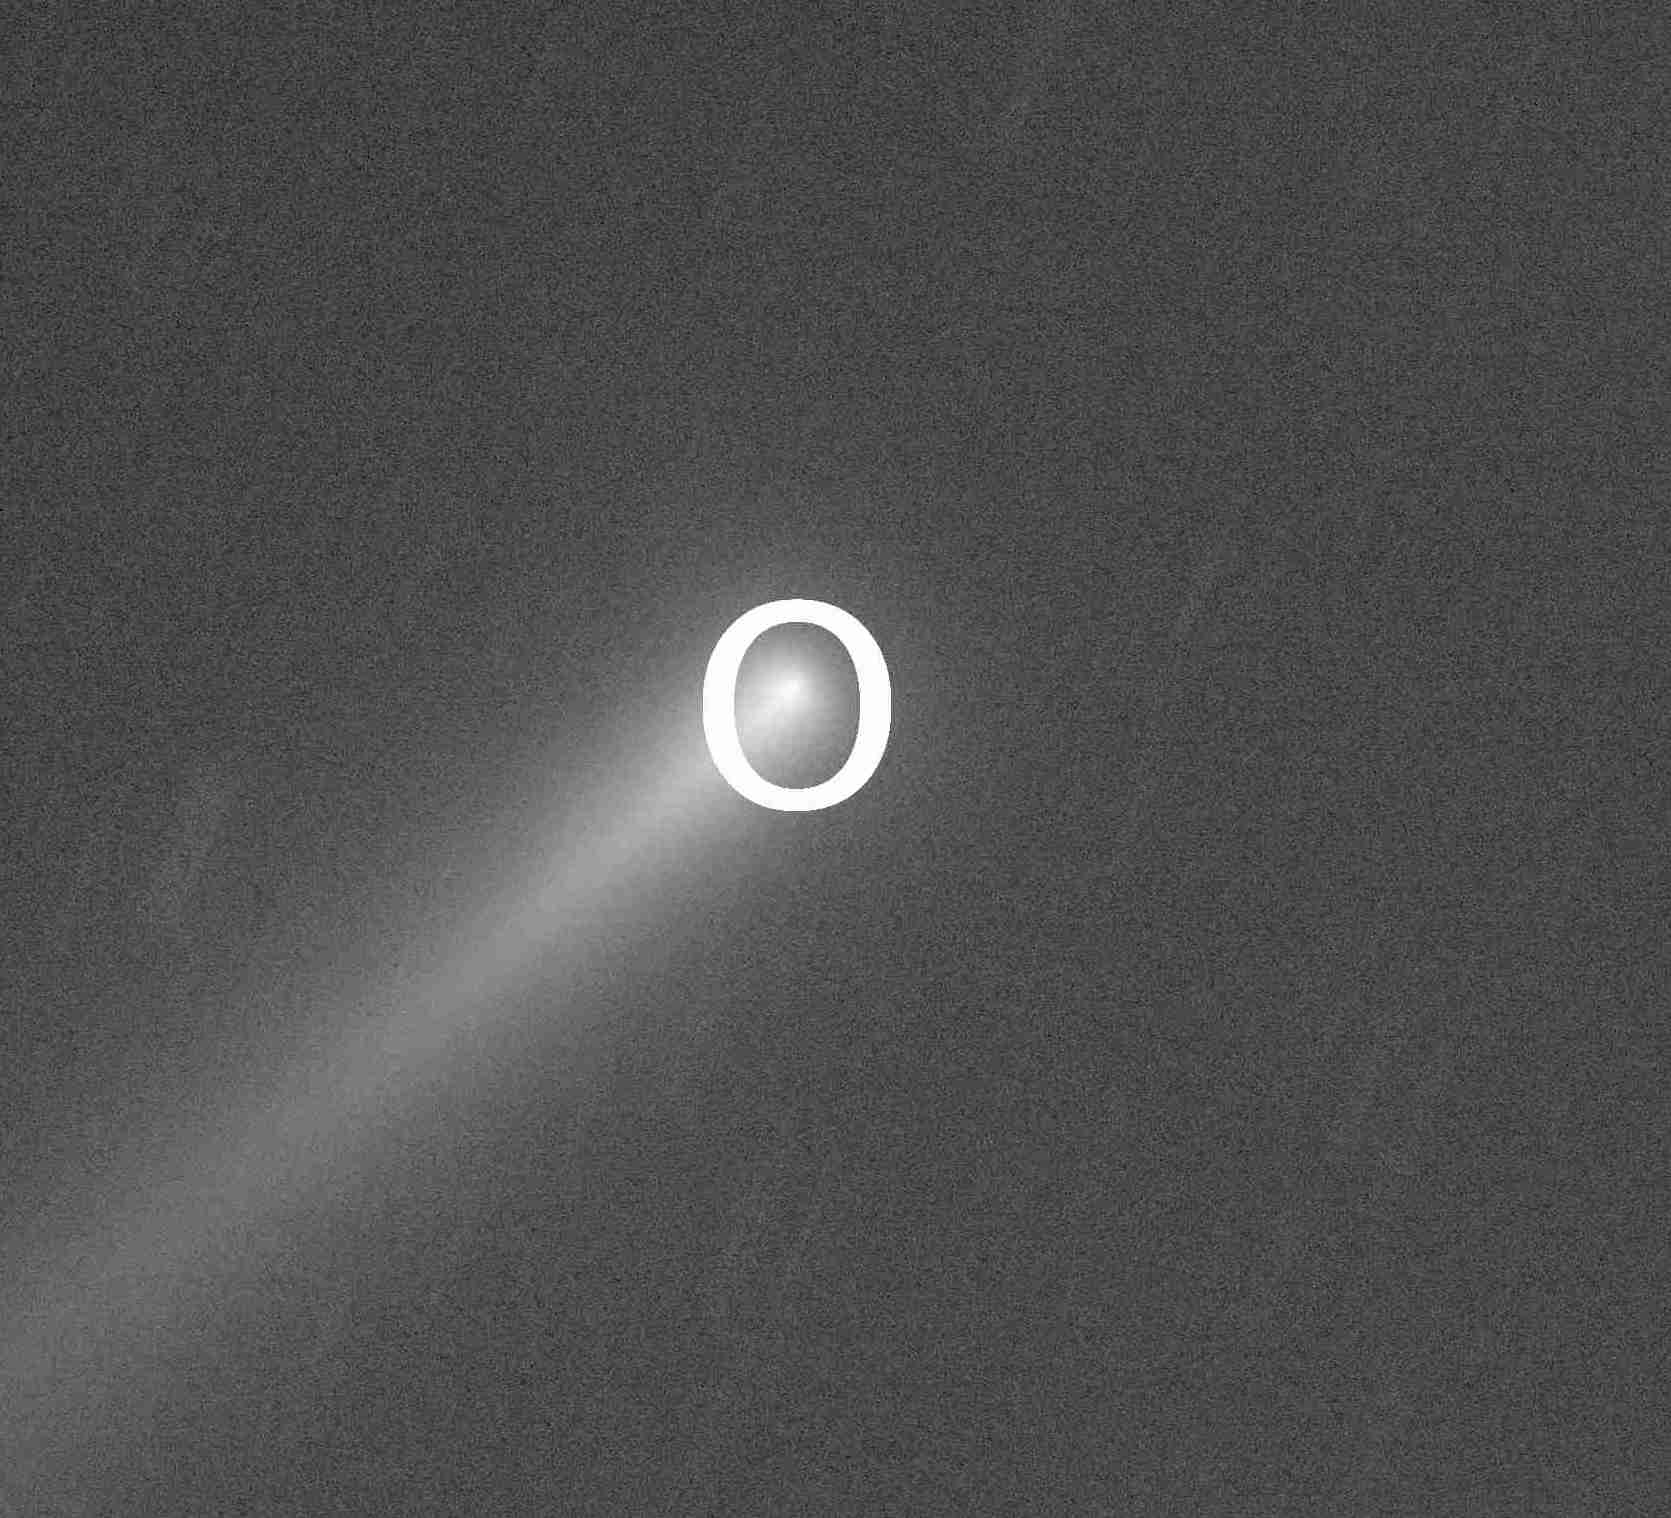 Comet with O.jpg